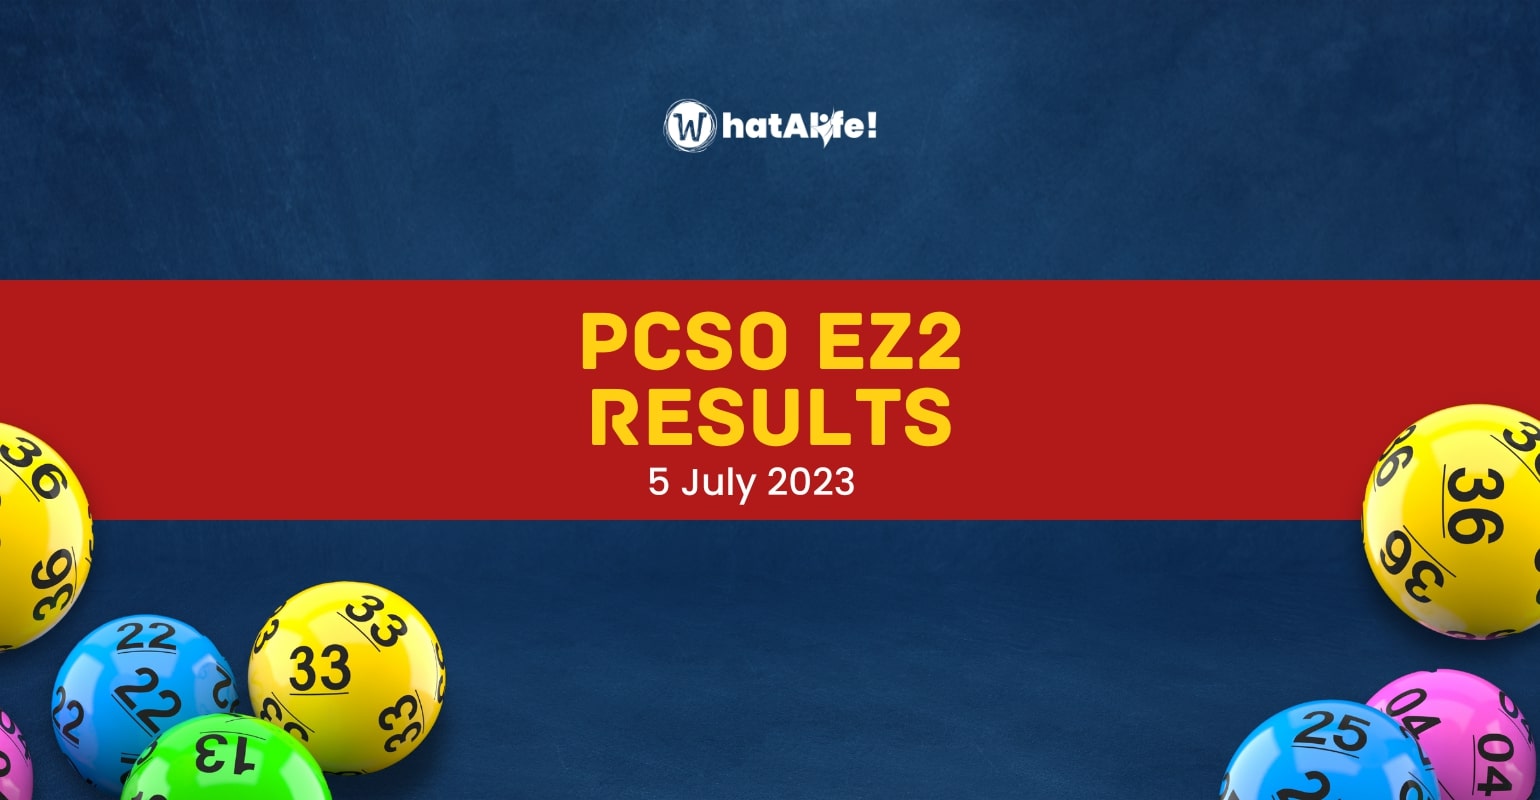 EZ2 2D RESULTS July 5, 2023 (Wednesday)